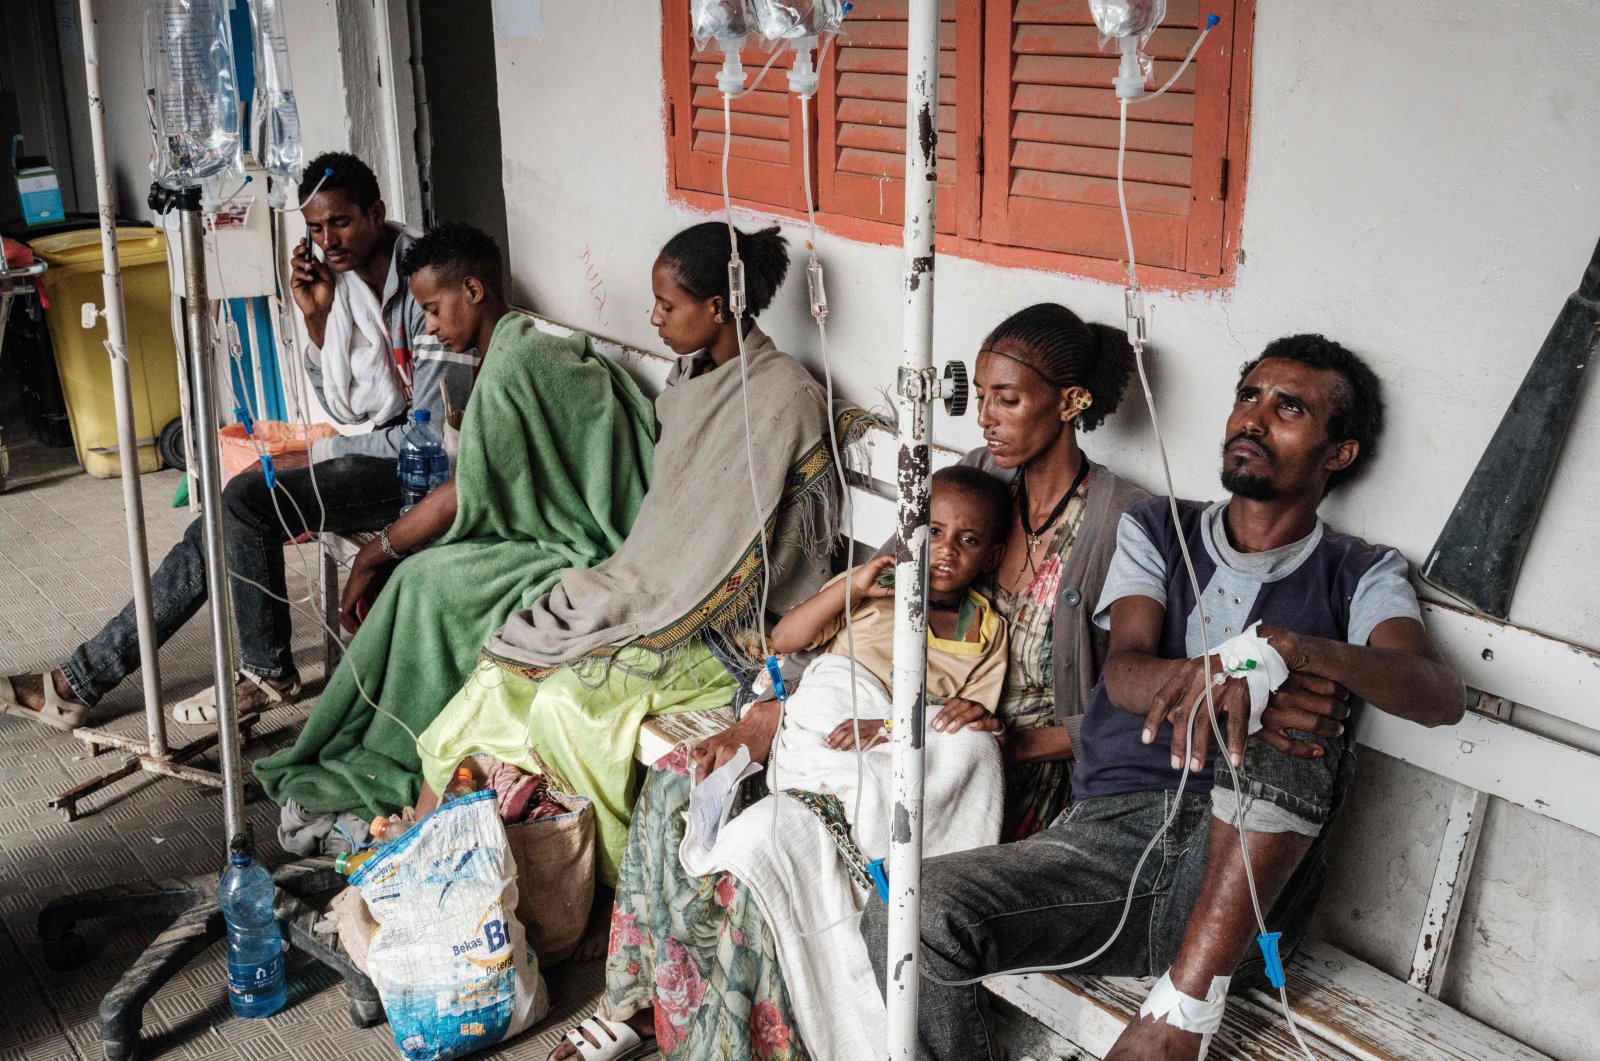 Civilians injured in a deadly airstrike on Togoga market wait for medical treatment at Mekele General Hospital in Mekele, Ethiopia, June 24, 2021, (AFP Photo)